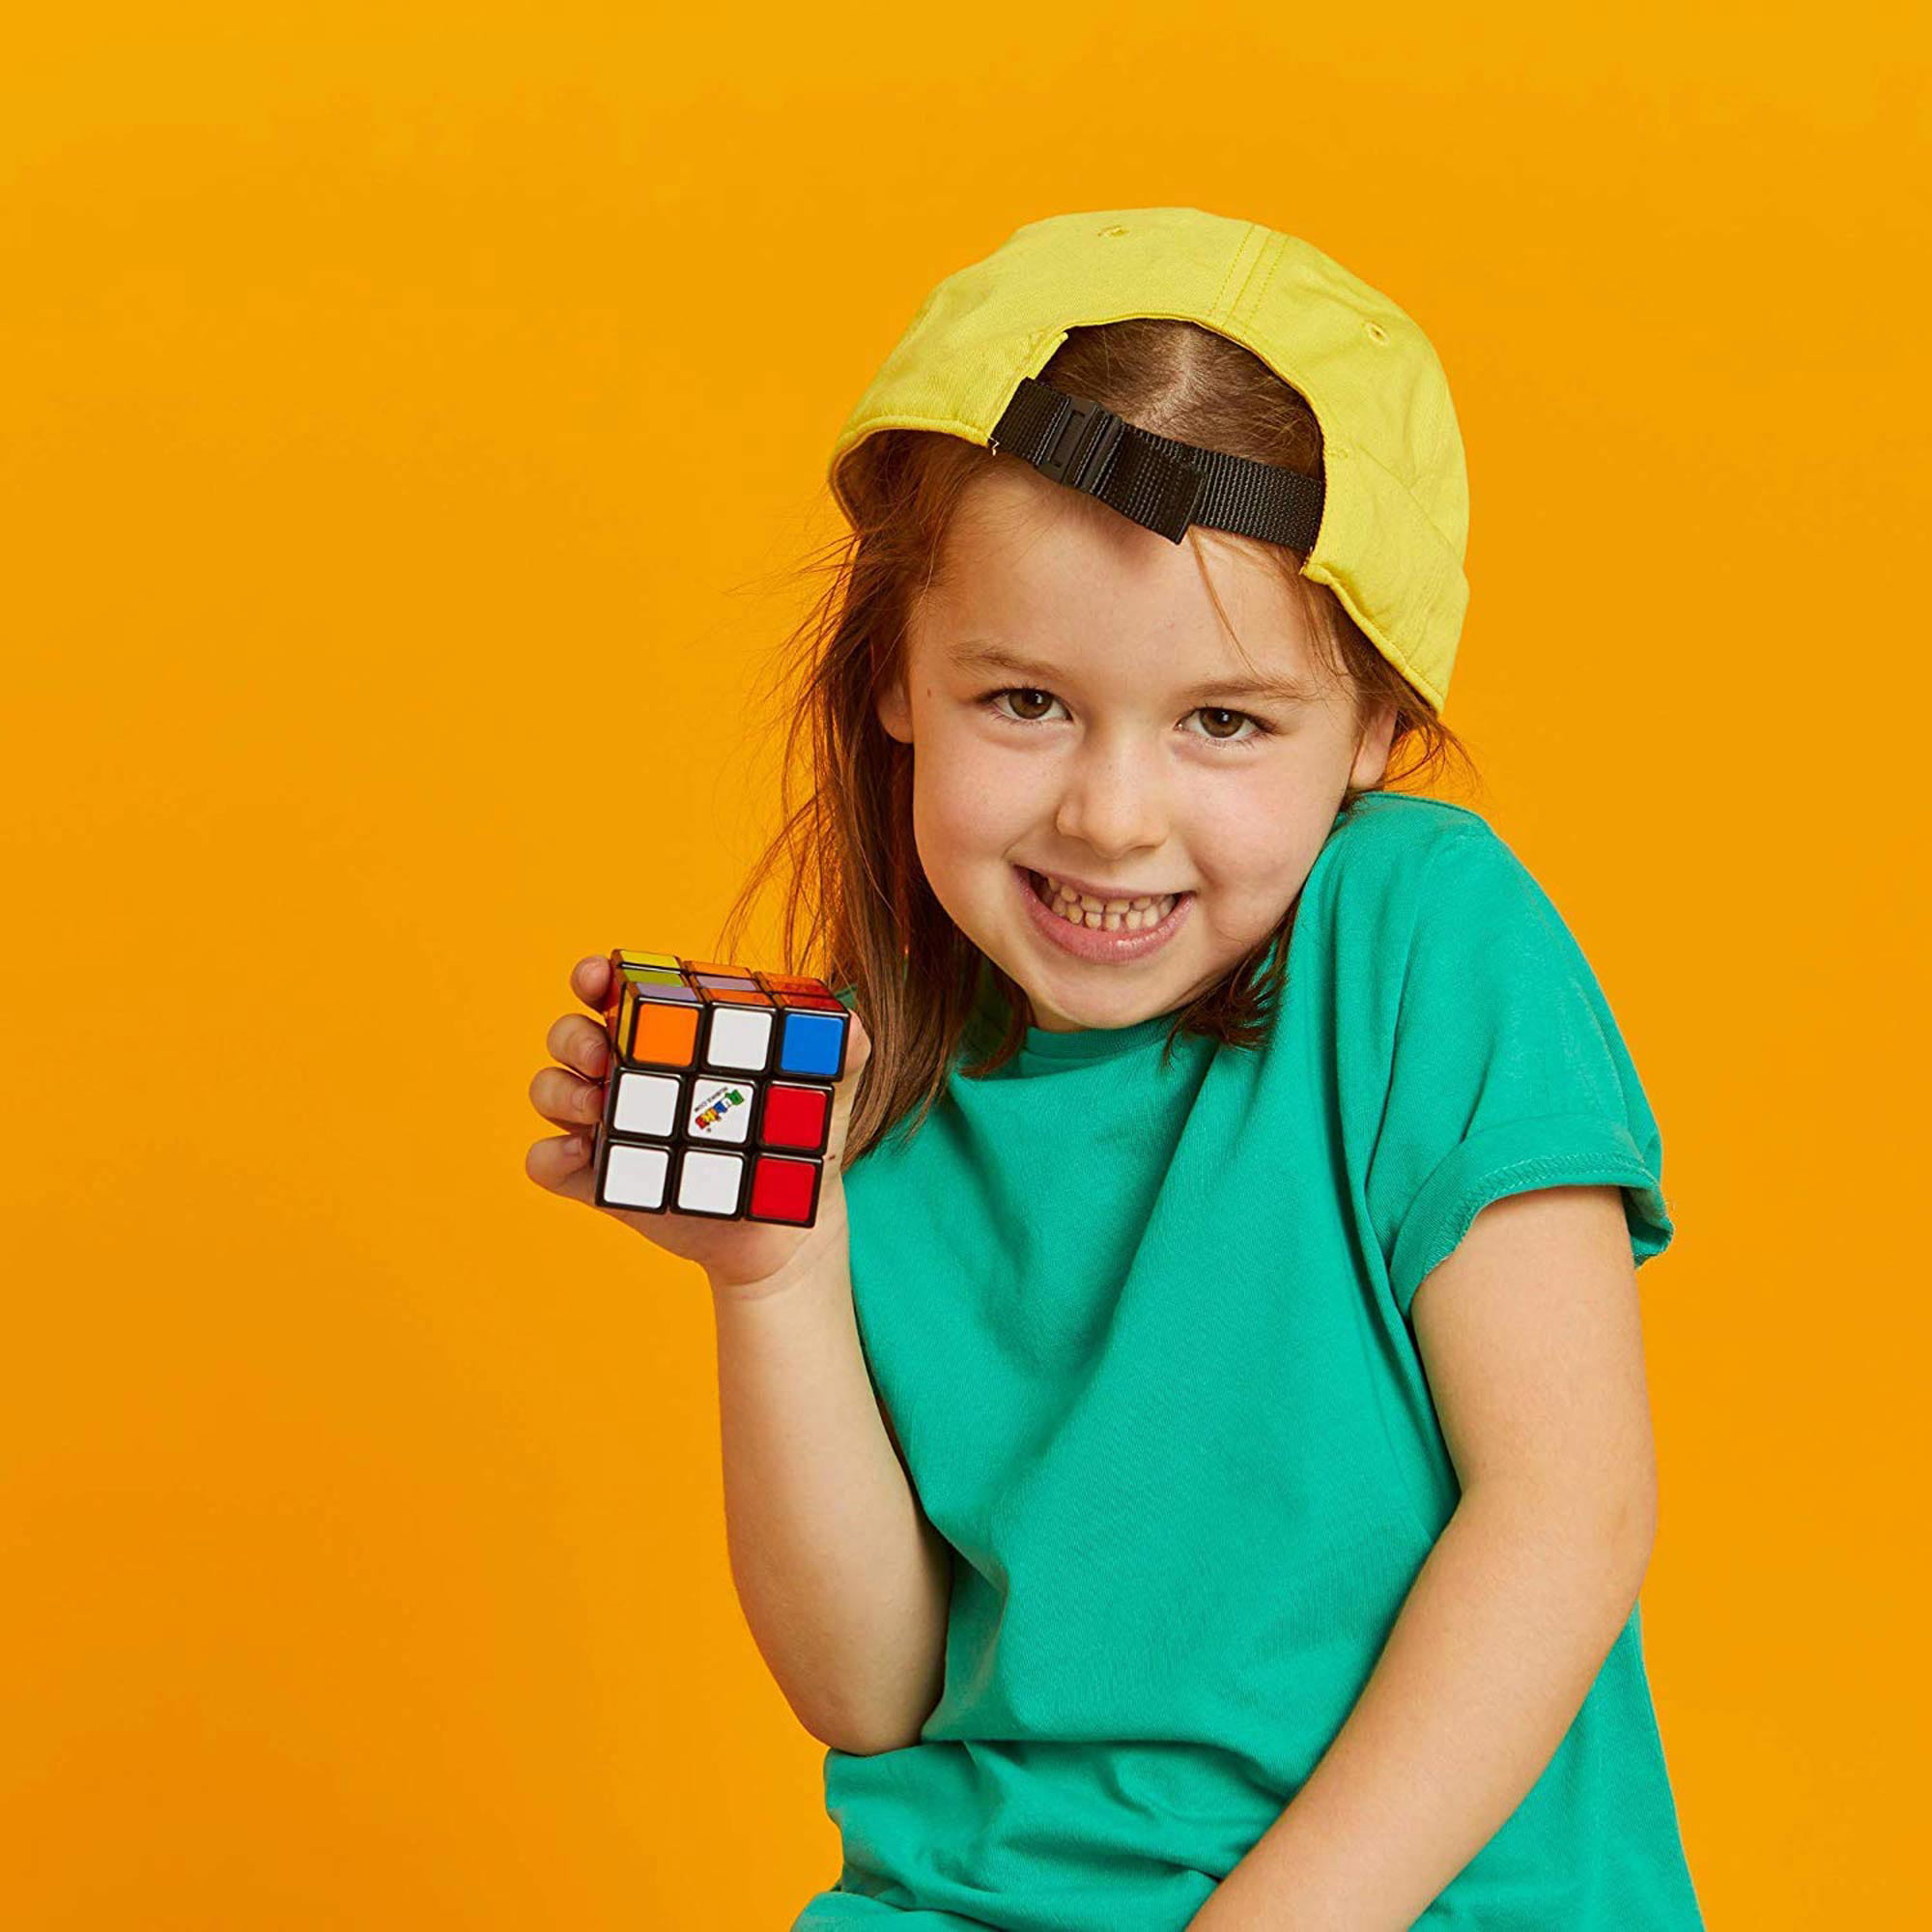 Cube 3 X 3 Puzzle Game For Kids - Walmart.com